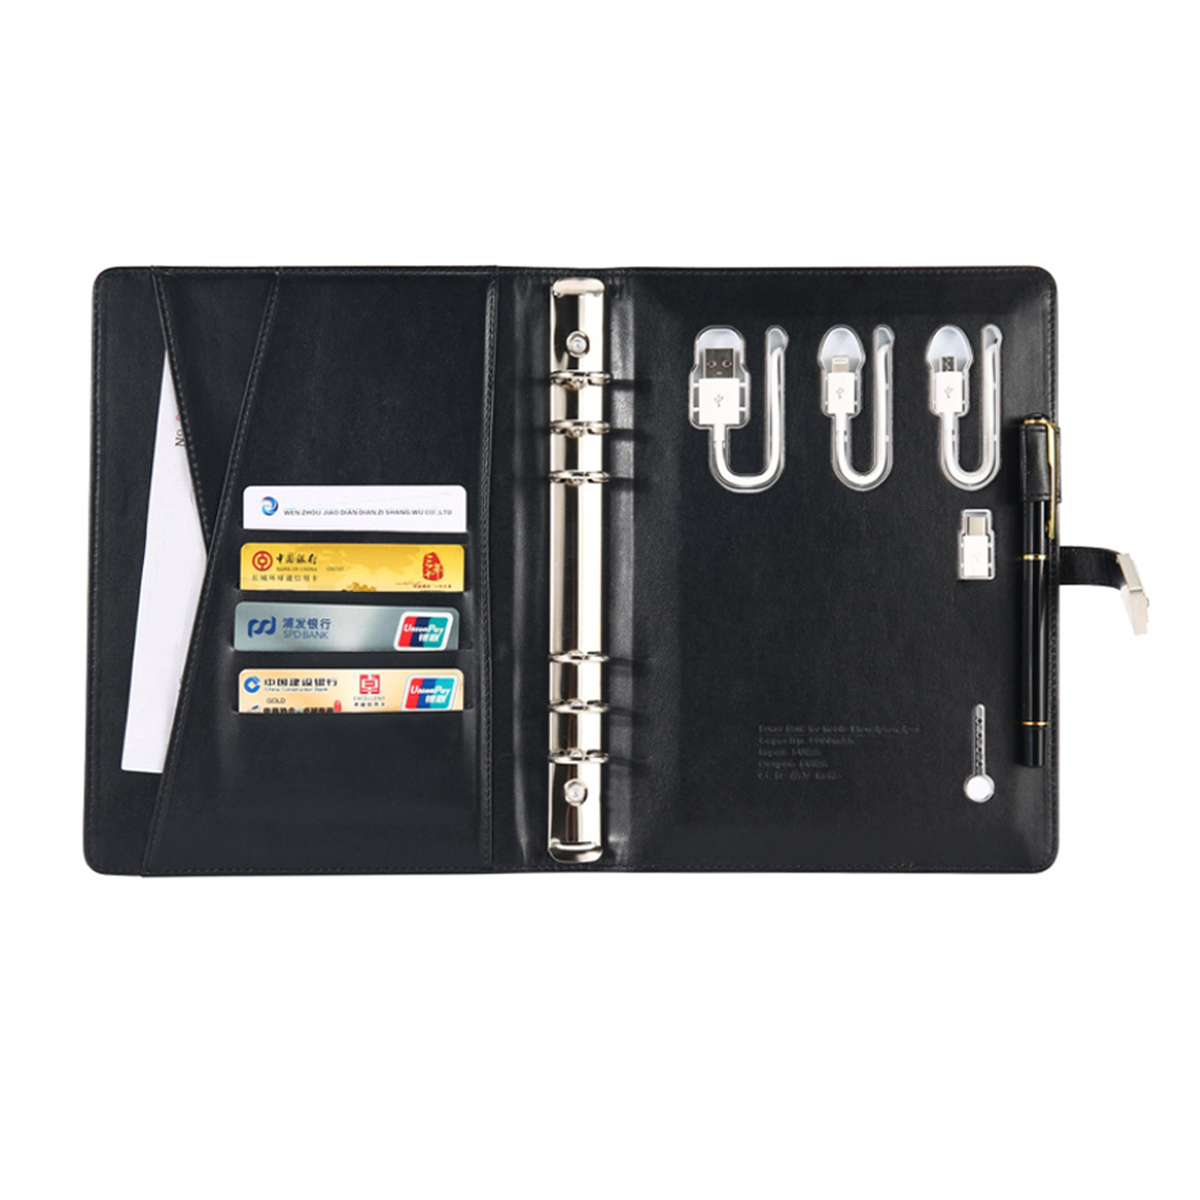 6-Ring Organizer with Power Bank